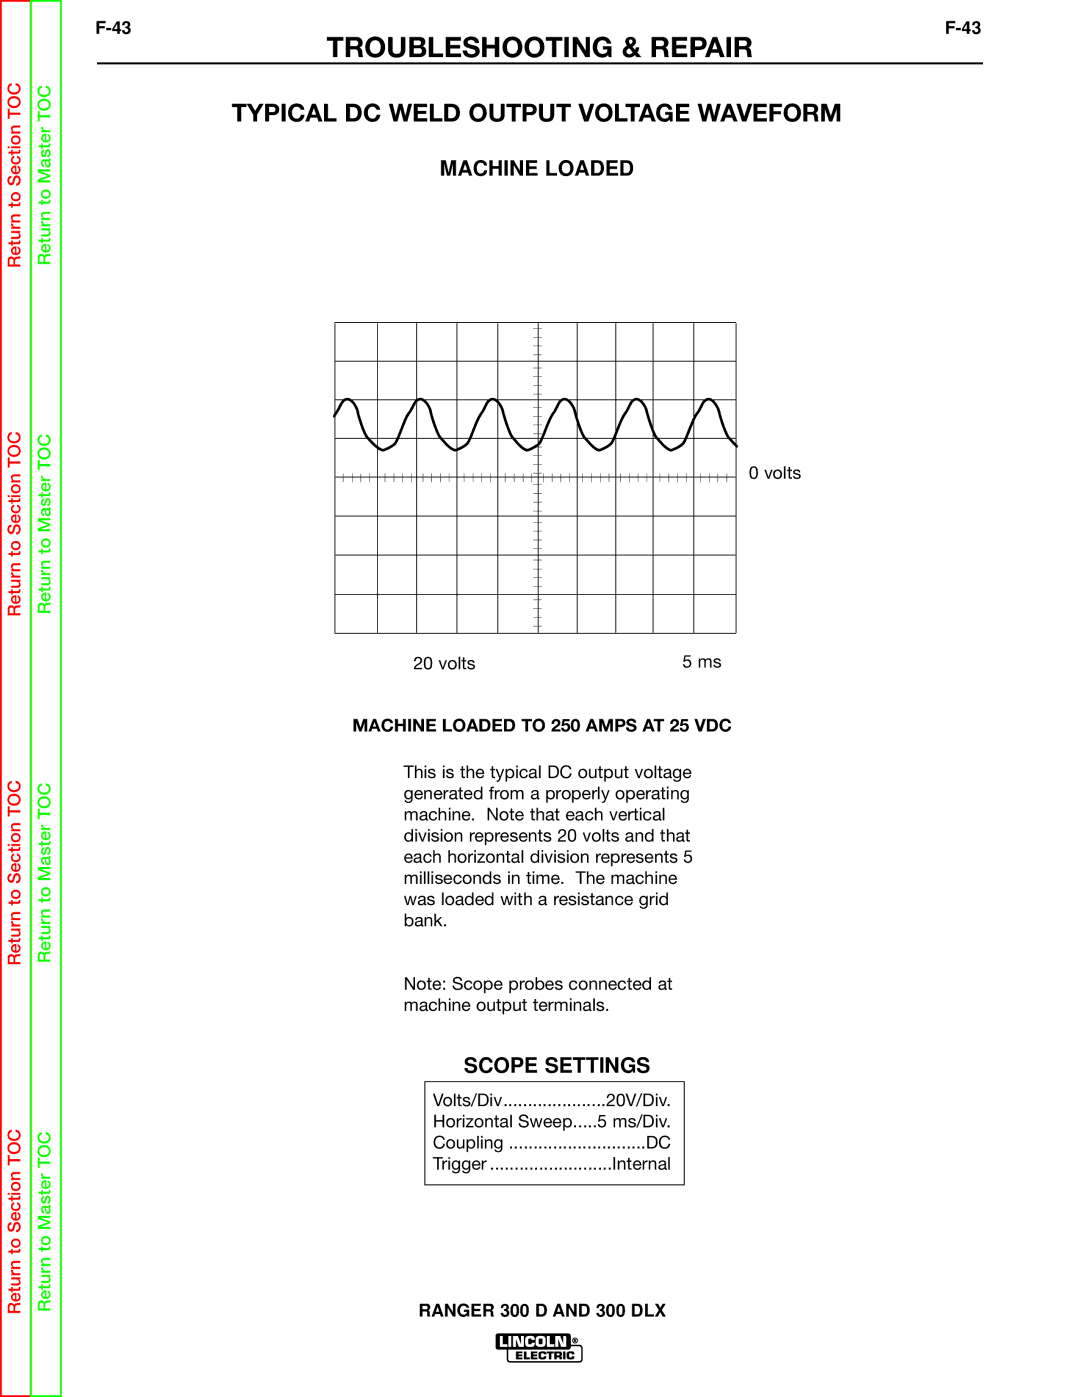 Lincoln Electric SVM148-B service manual Typical DC Weld Output Voltage Waveform, Machine Loaded to 250 Amps AT 25 VDC 